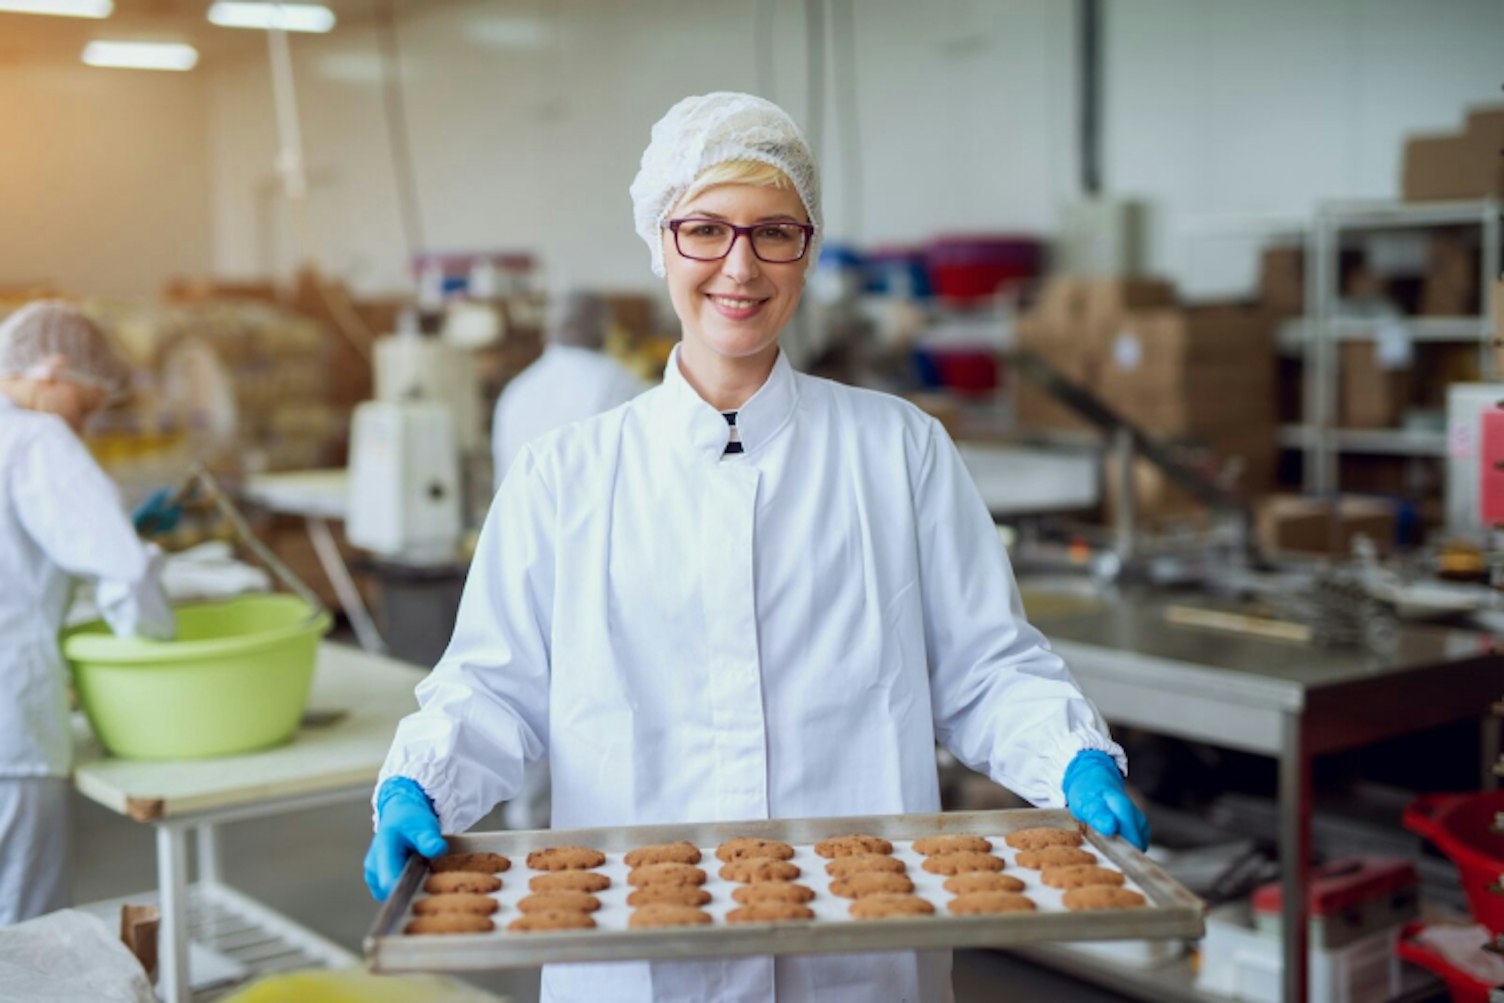 Worker in Food Production Factory